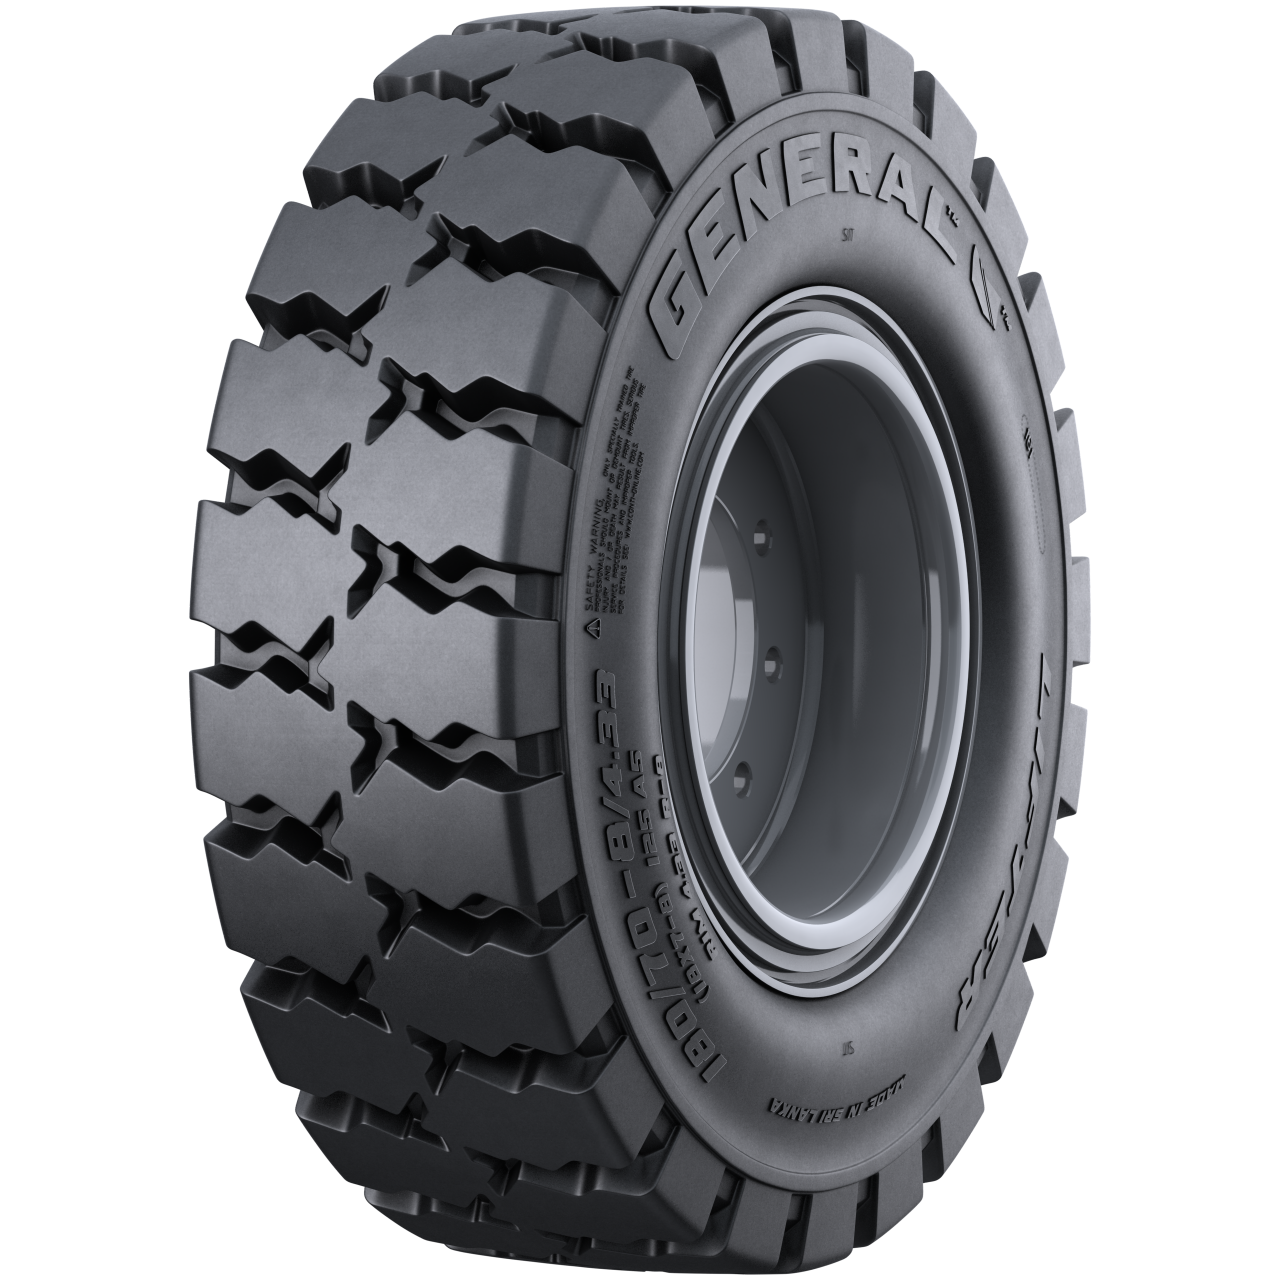 General Tire Lifter